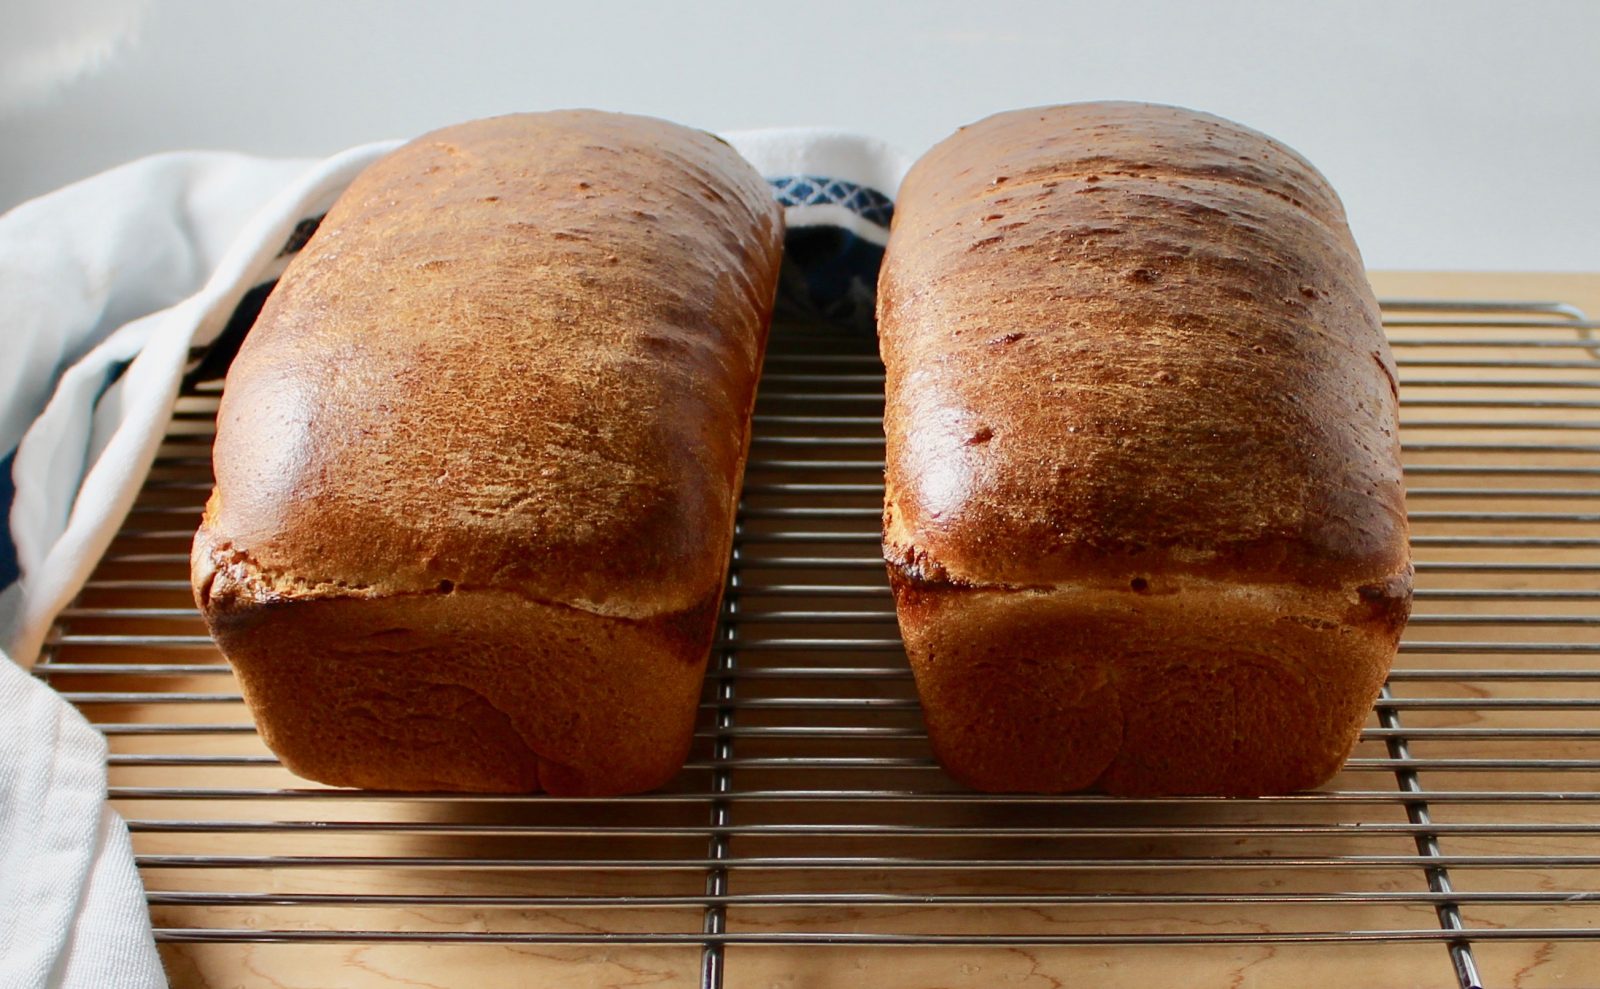 https://www.epicuricloud.com/wp-content/uploads/2020/03/Simple-Homemade-White-Bread-2-loaves-uncut-1600x989.jpg